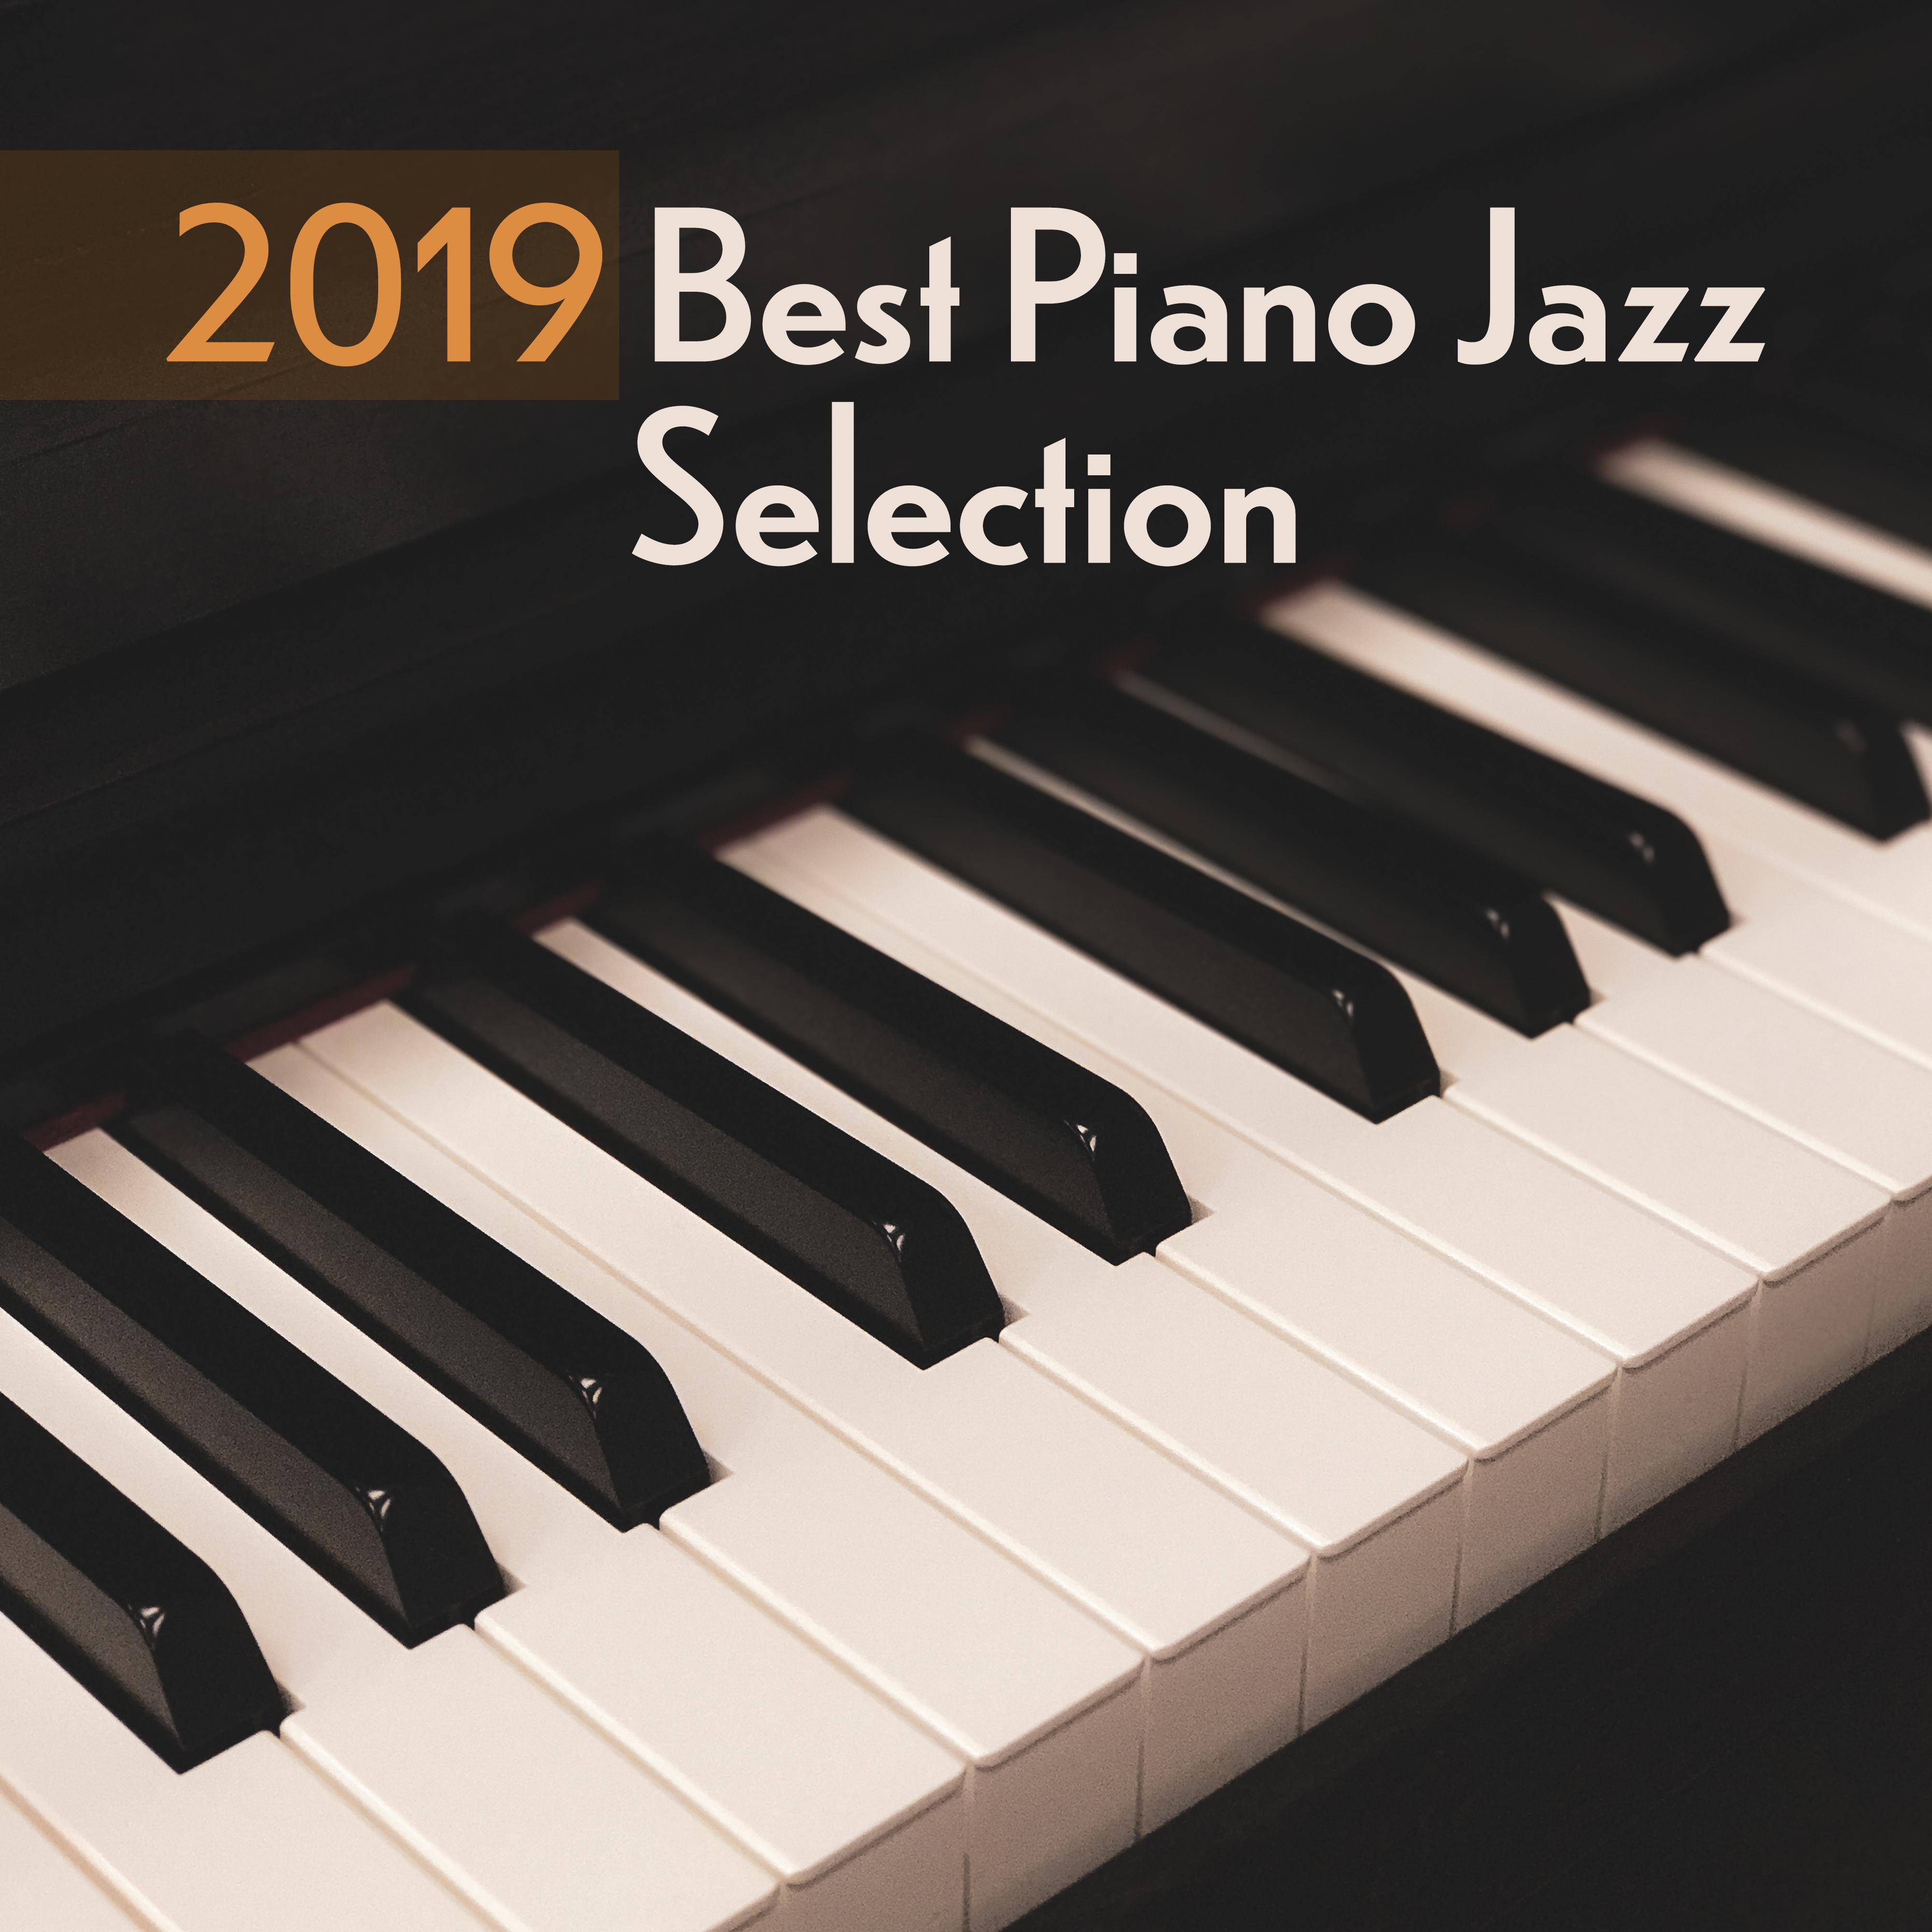 2019 Best Piano Jazz Selection